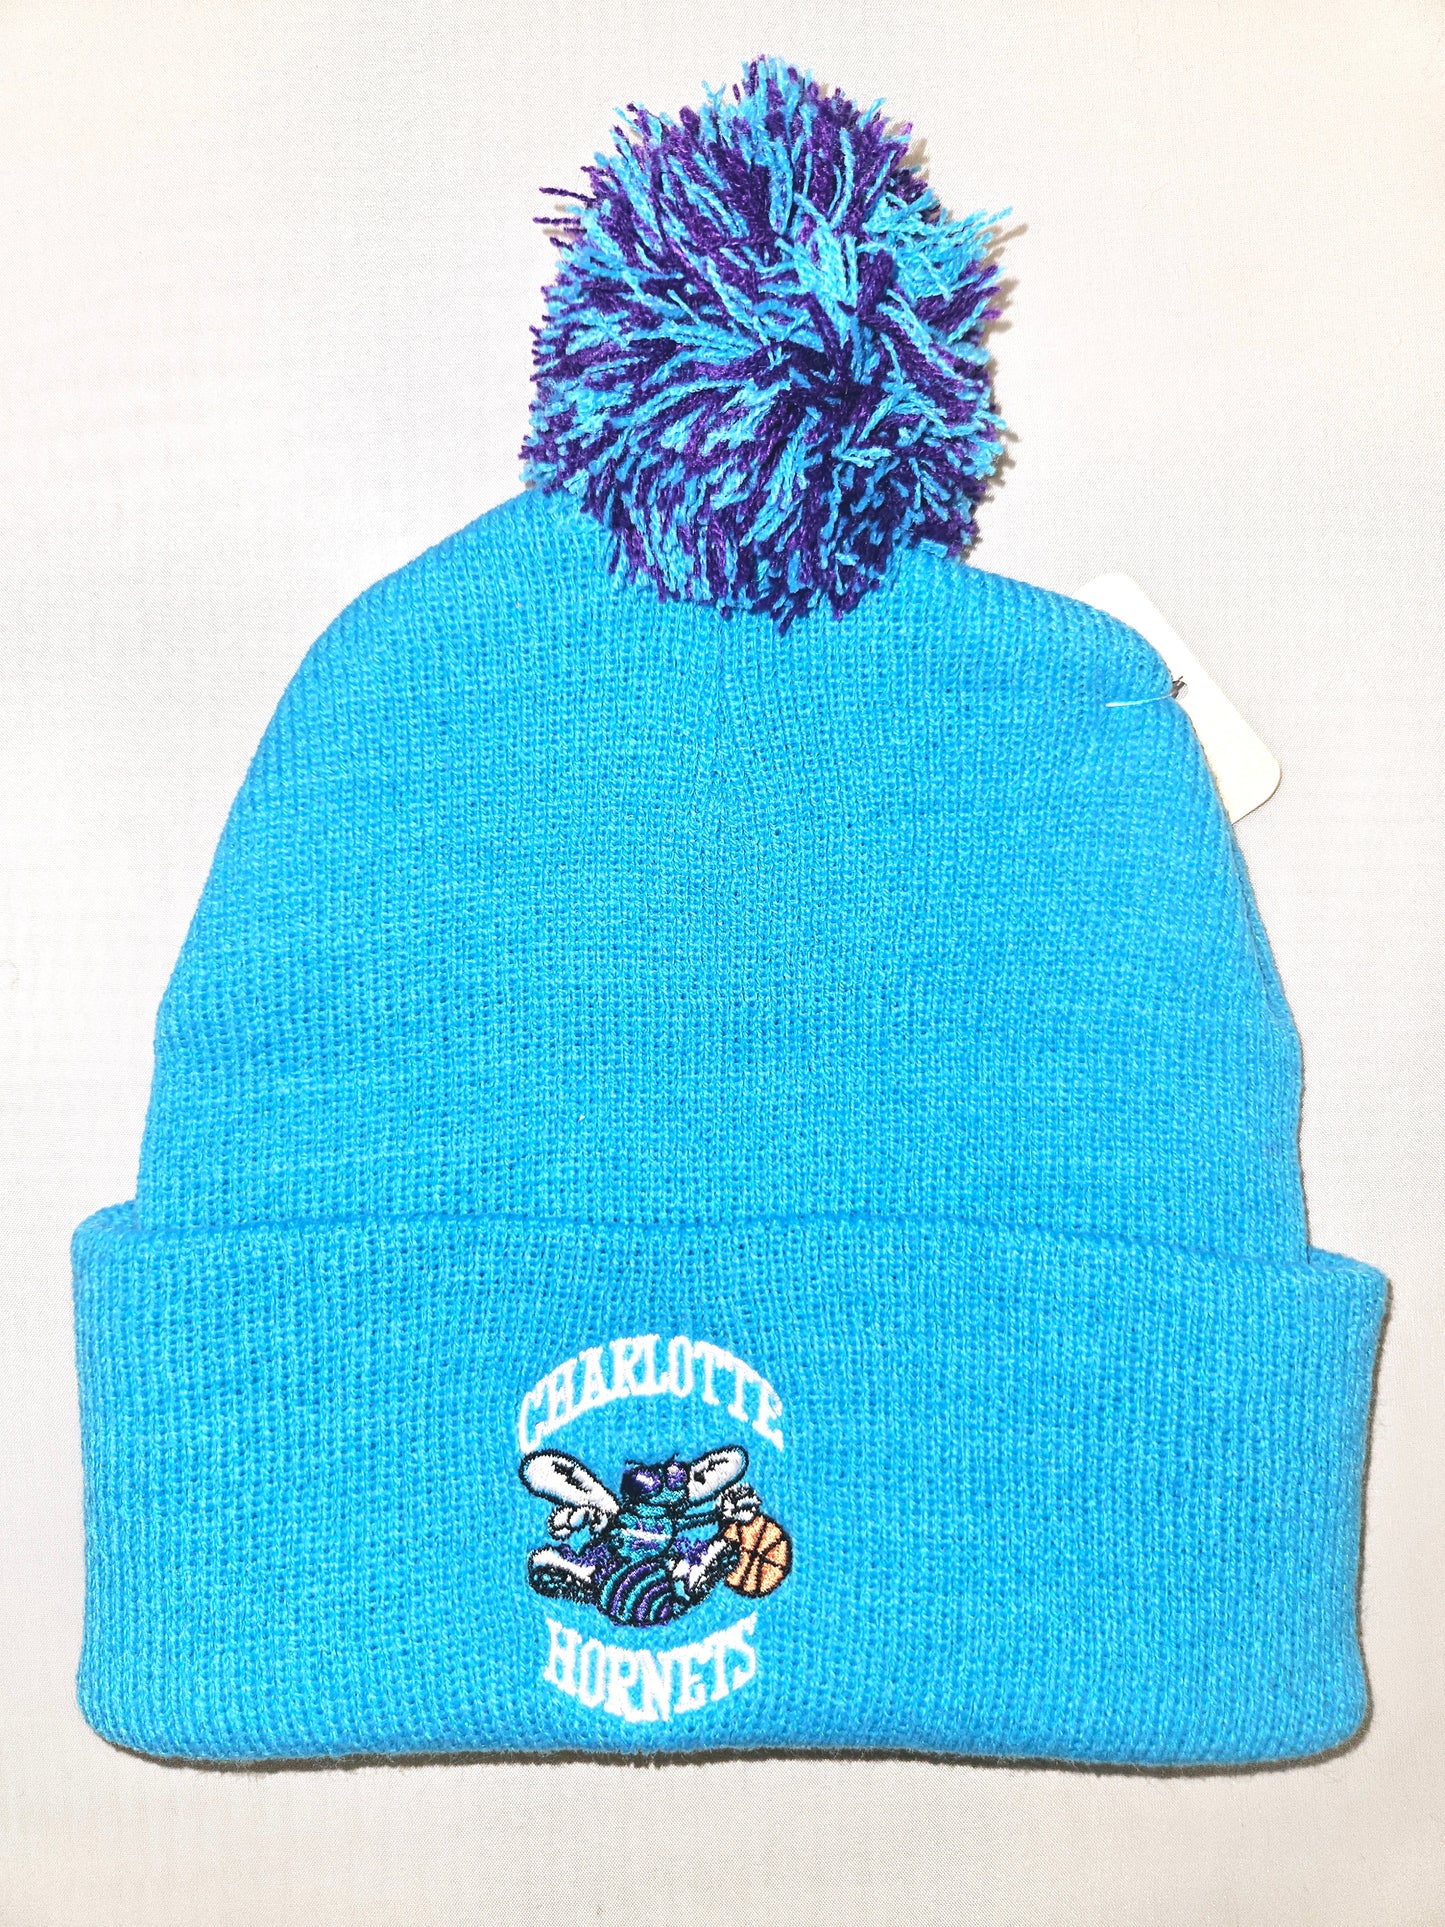 Charlotte Hornets NBA NWT Vintage Authentic Cuffed Pomp Beanie By Adidas